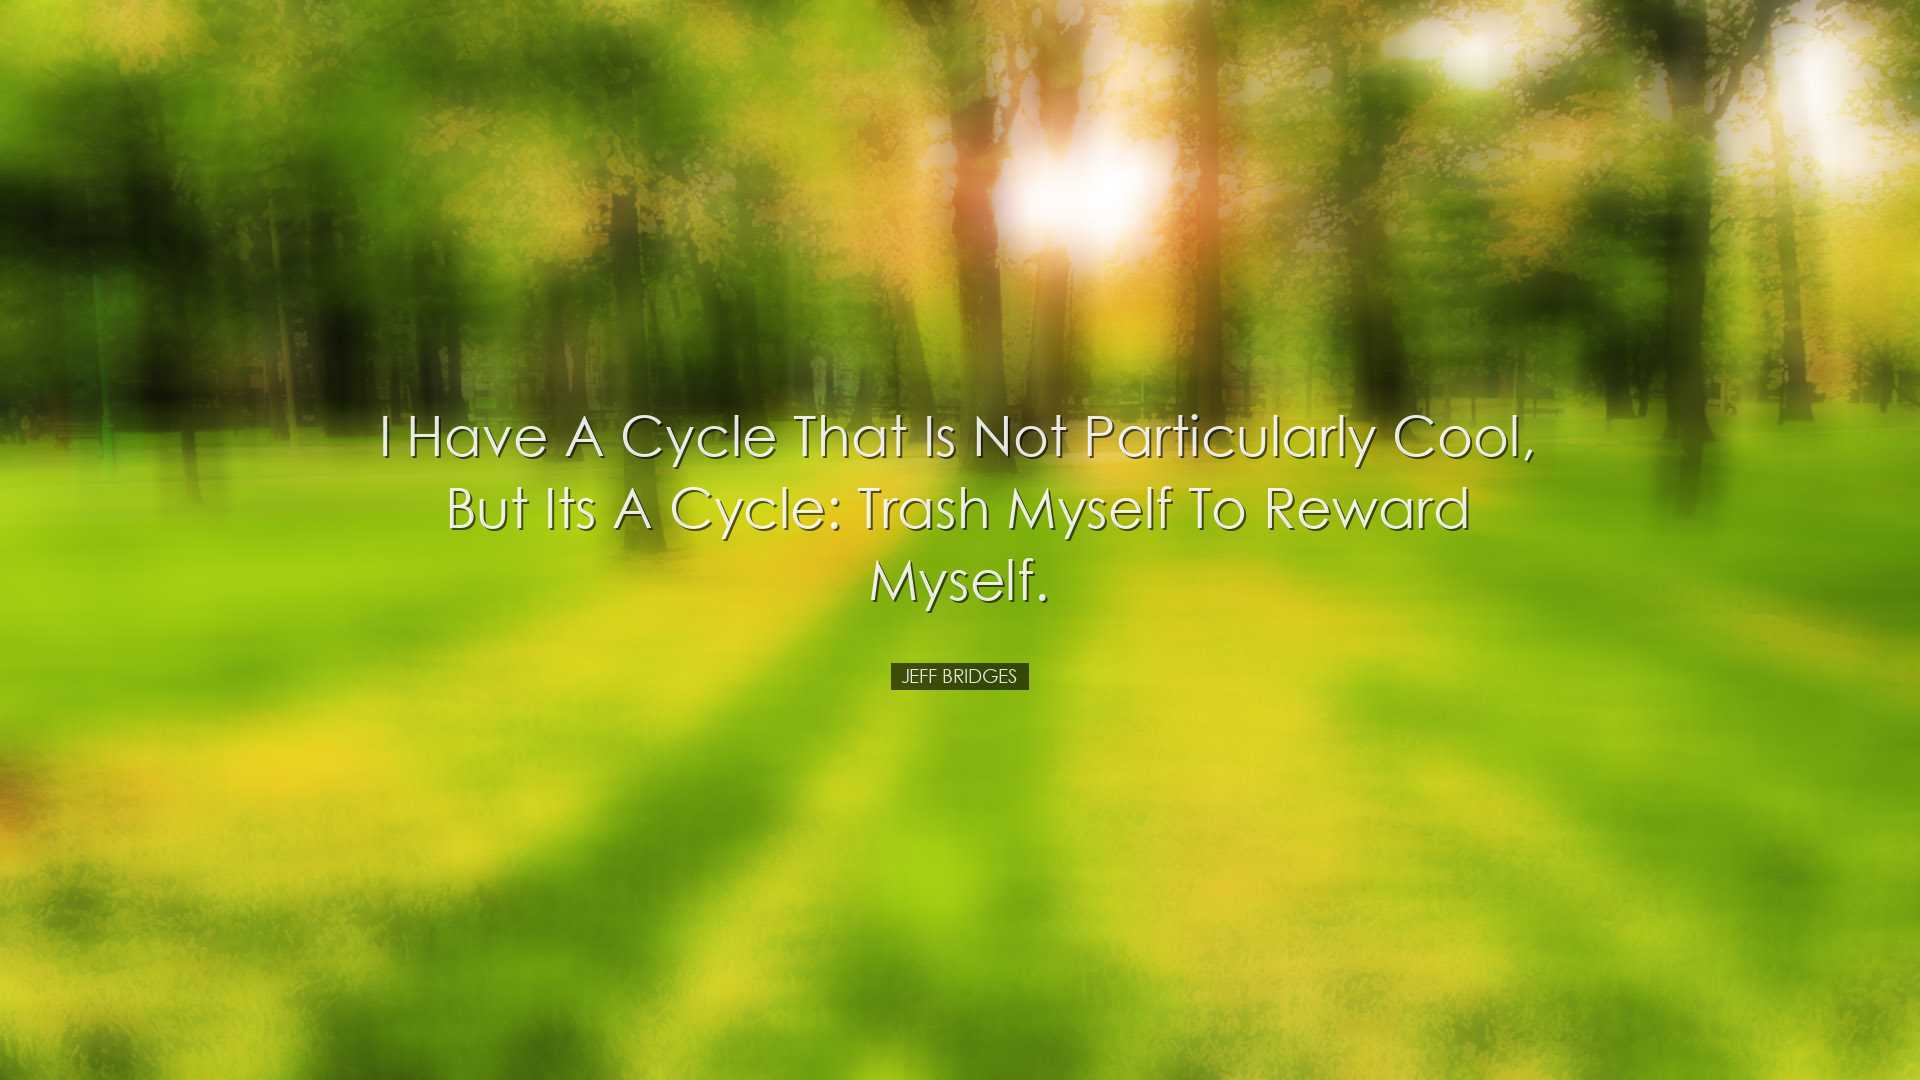 I have a cycle that is not particularly cool, but its a cycle: tra